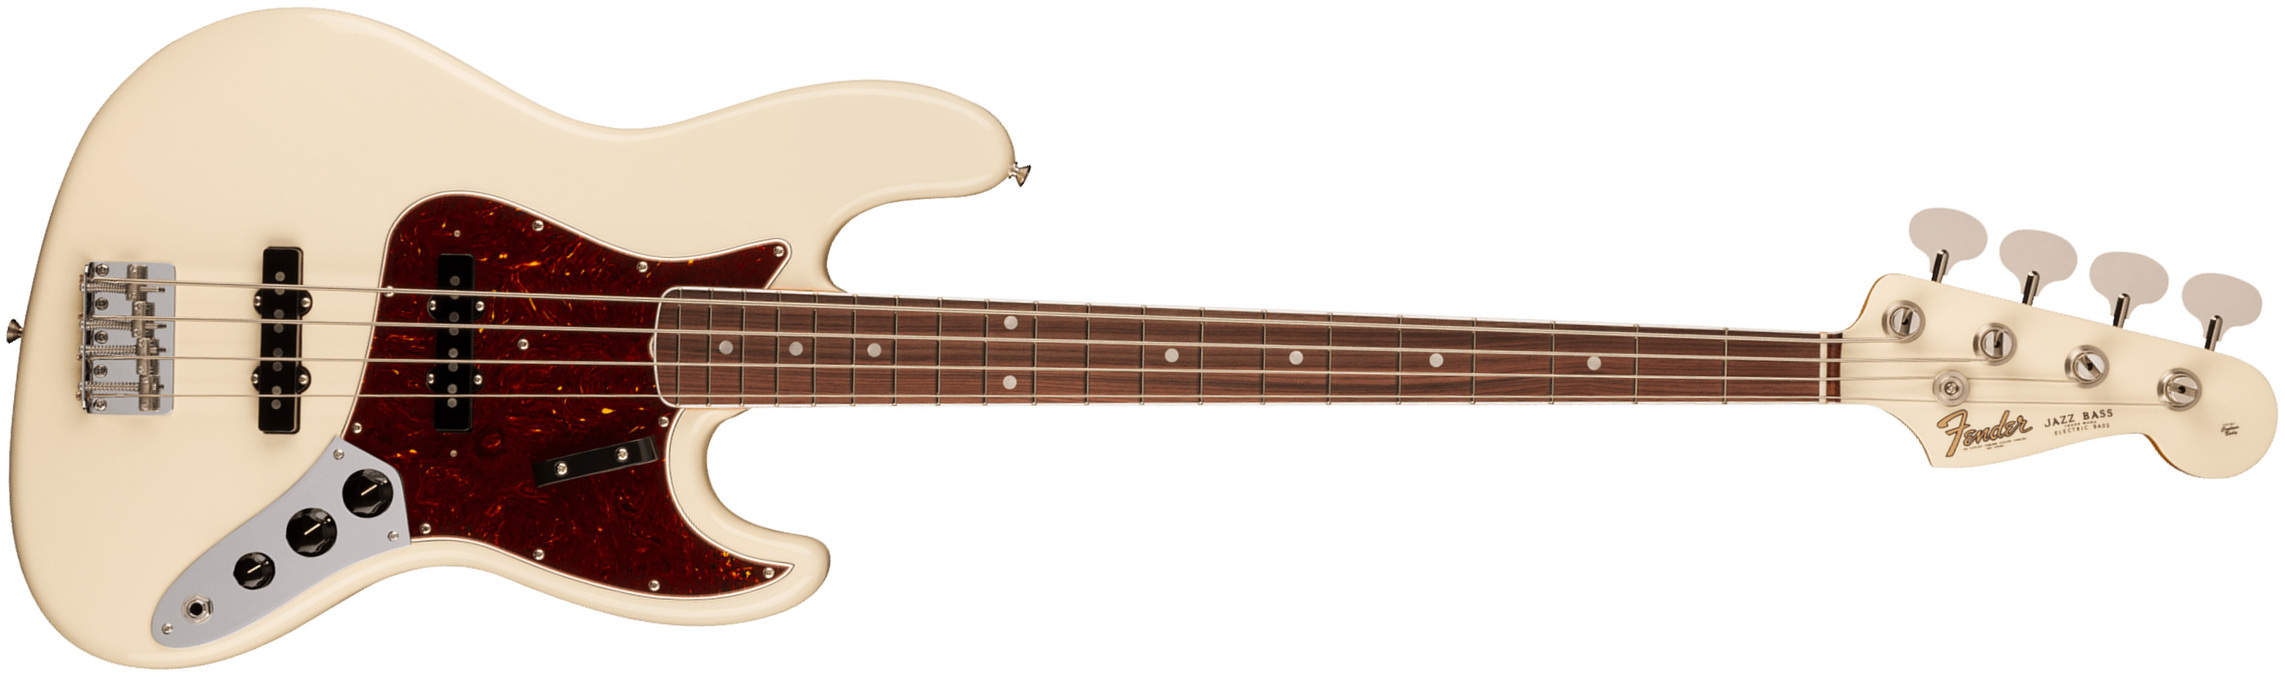 Fender Jazz Bass 1966 American Vintage Ii Usa Rw - Olympic White - Solid body elektrische bas - Main picture